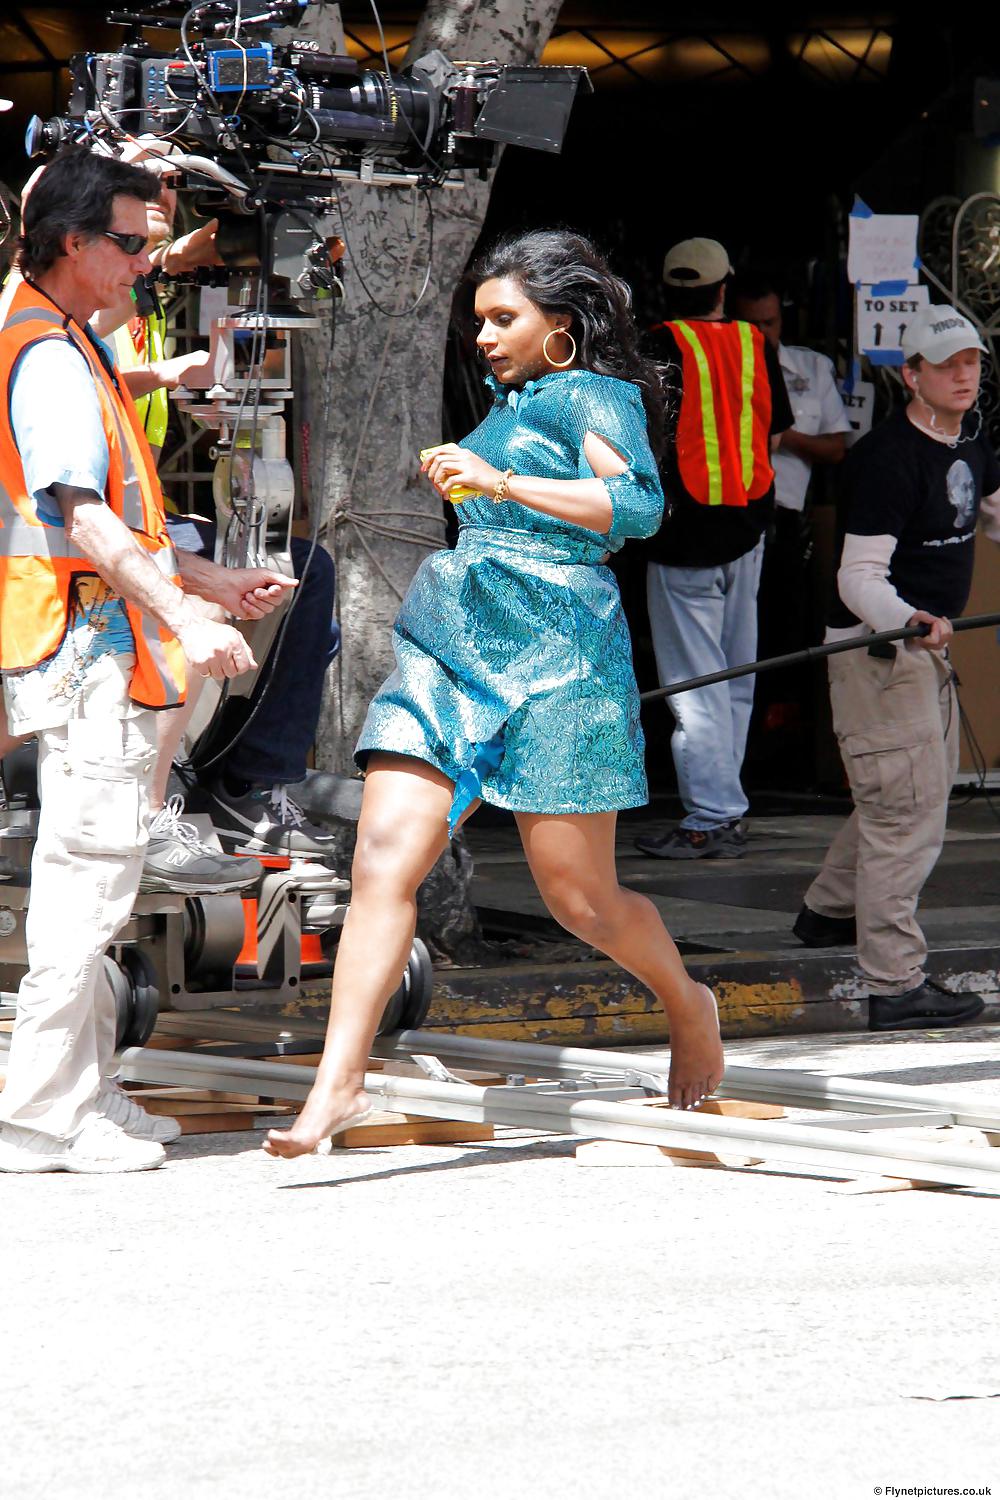 Hot Indian comedian Mindy Kaling - What would you do to her? #16251199